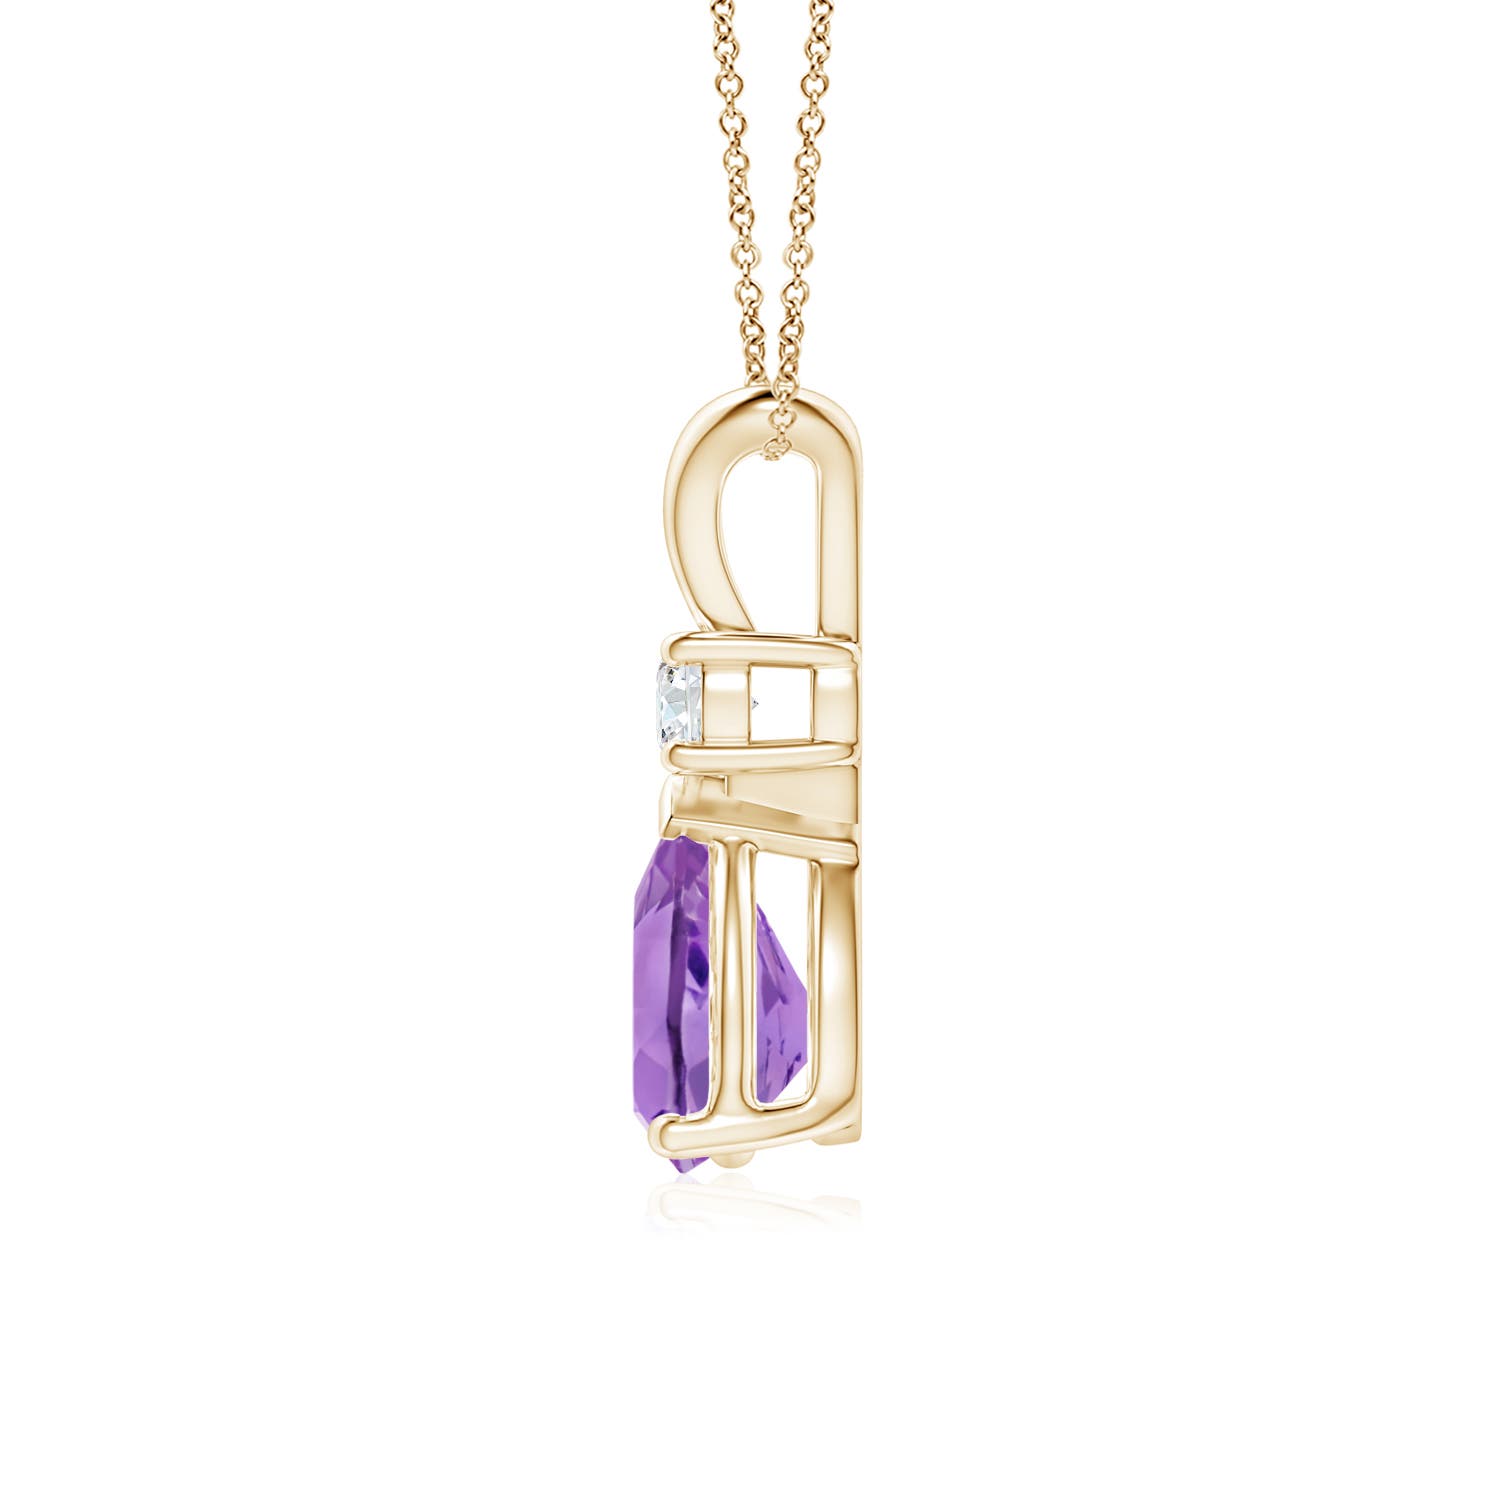 A - Amethyst / 1.11 CT / 14 KT Yellow Gold